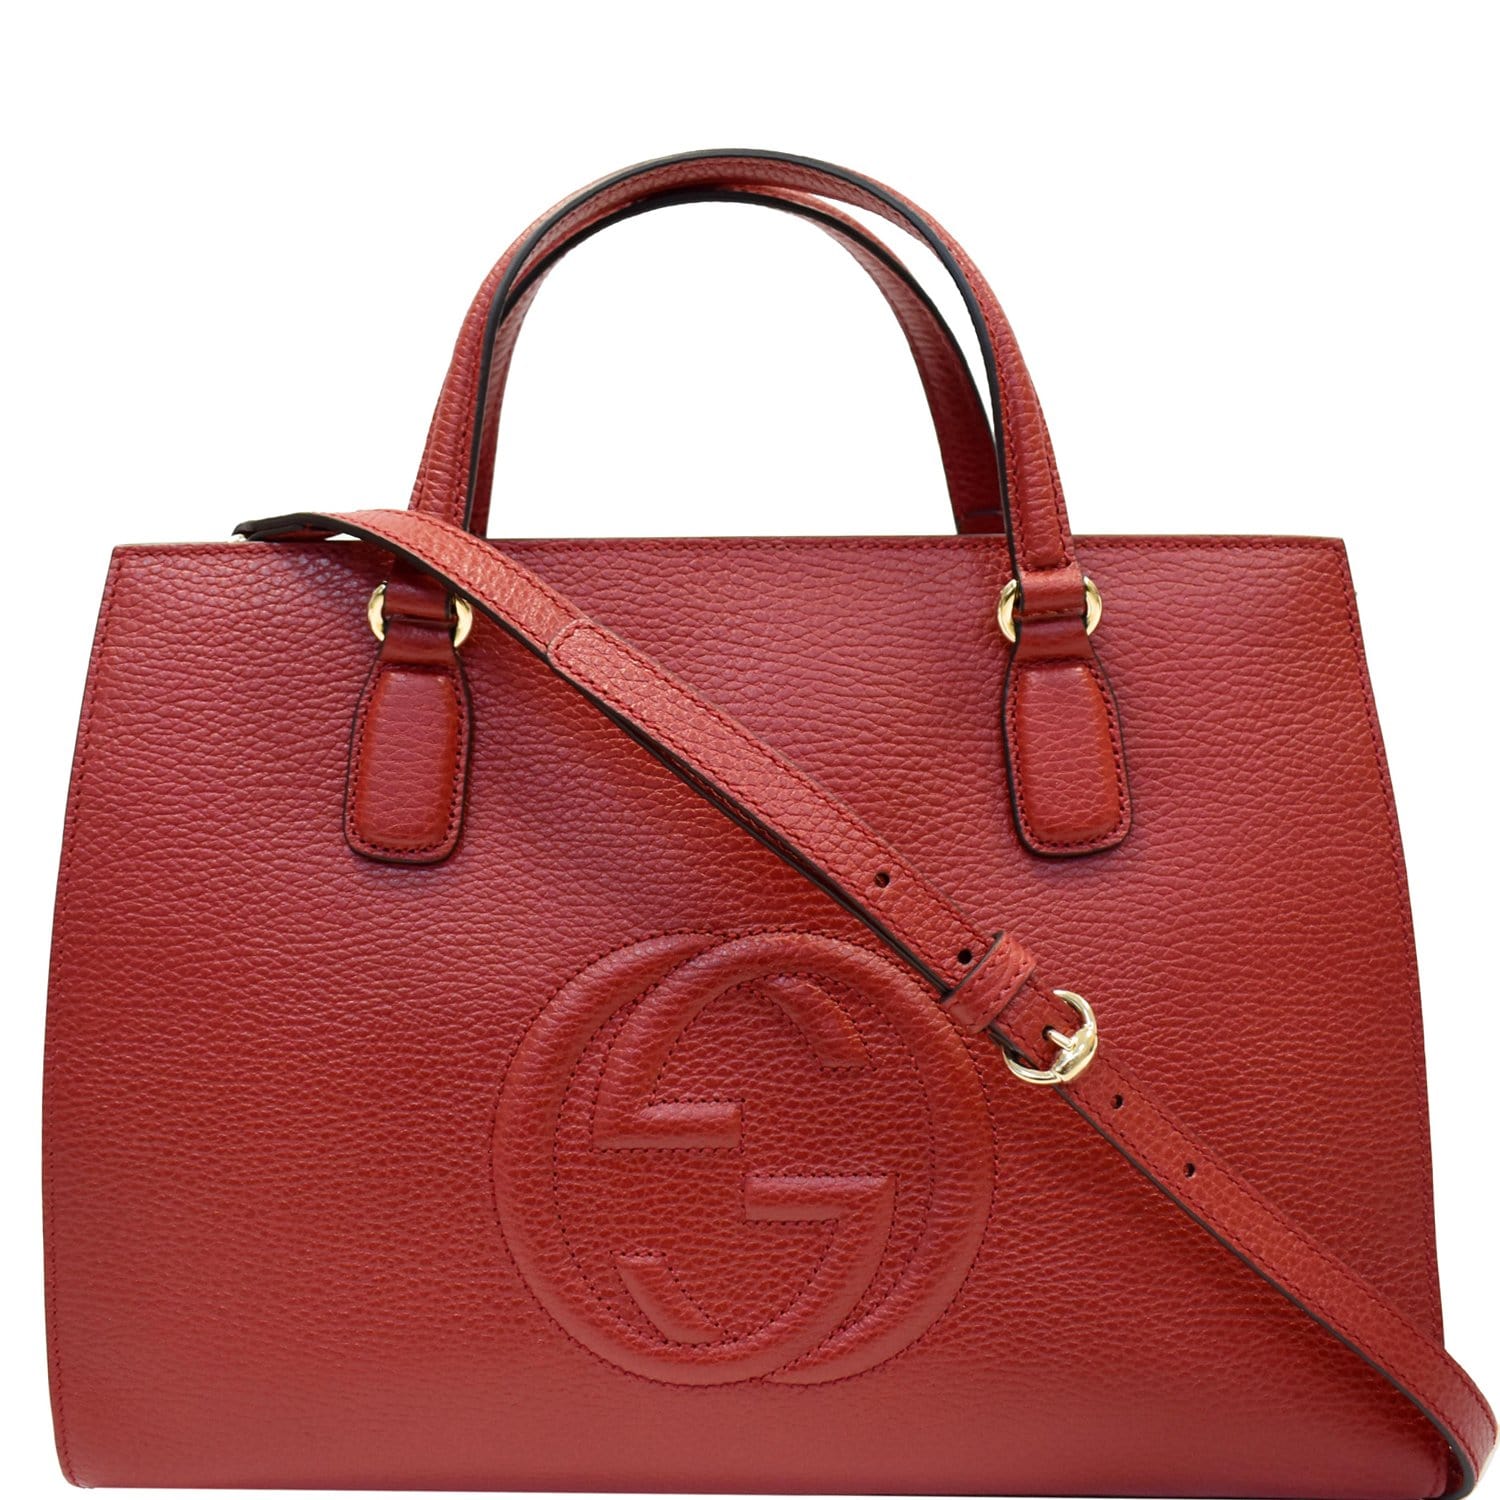 Gucci Soho Convertible Soft Top Handle Bag Leather Red 217940379